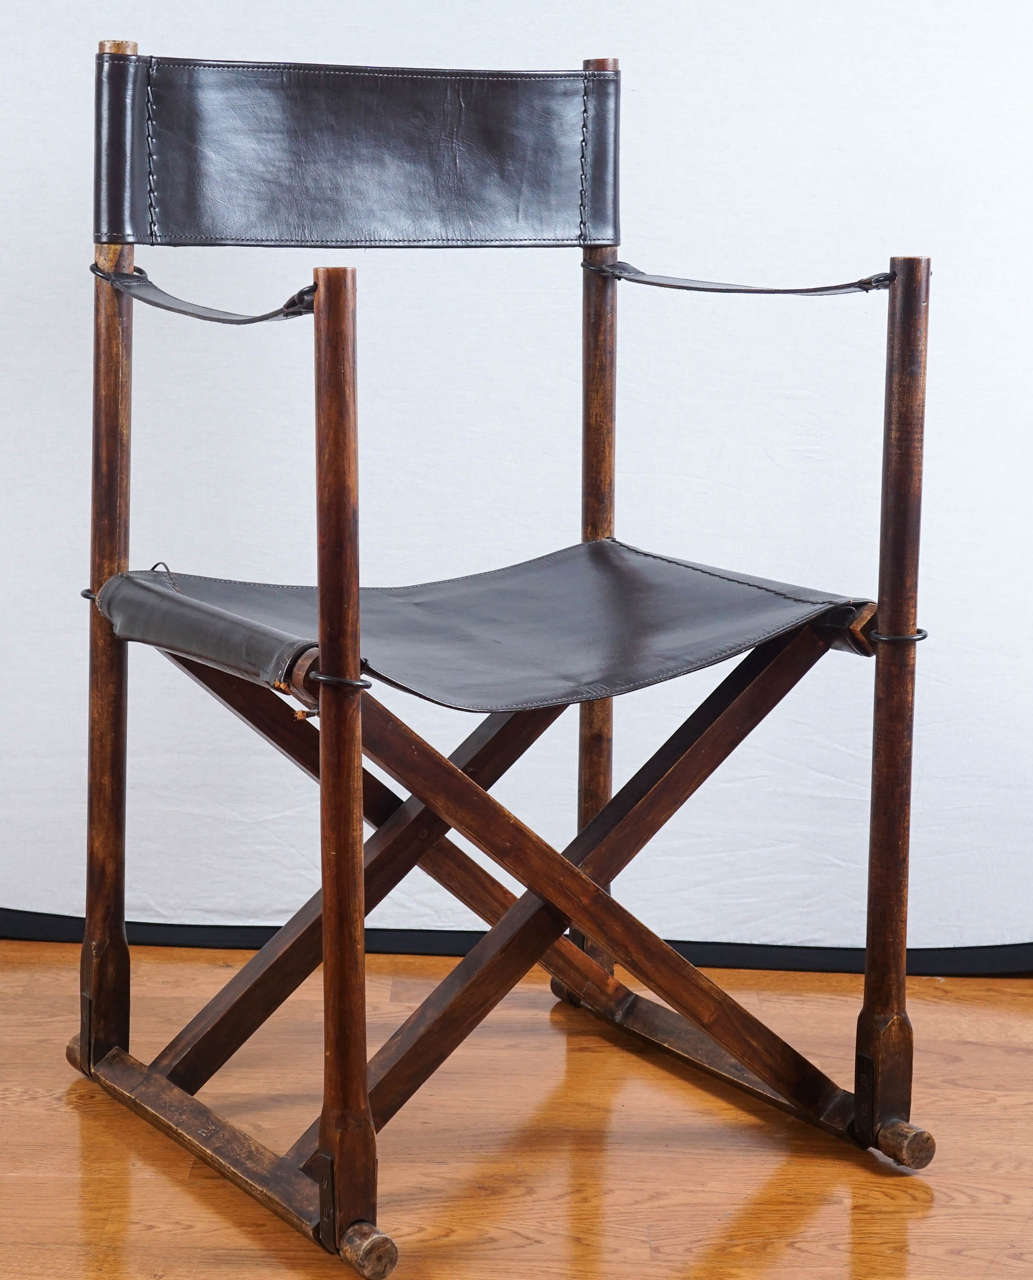 handsome, black stitched leather, campaign style chair.
folds up nicely, to a convenient, 5